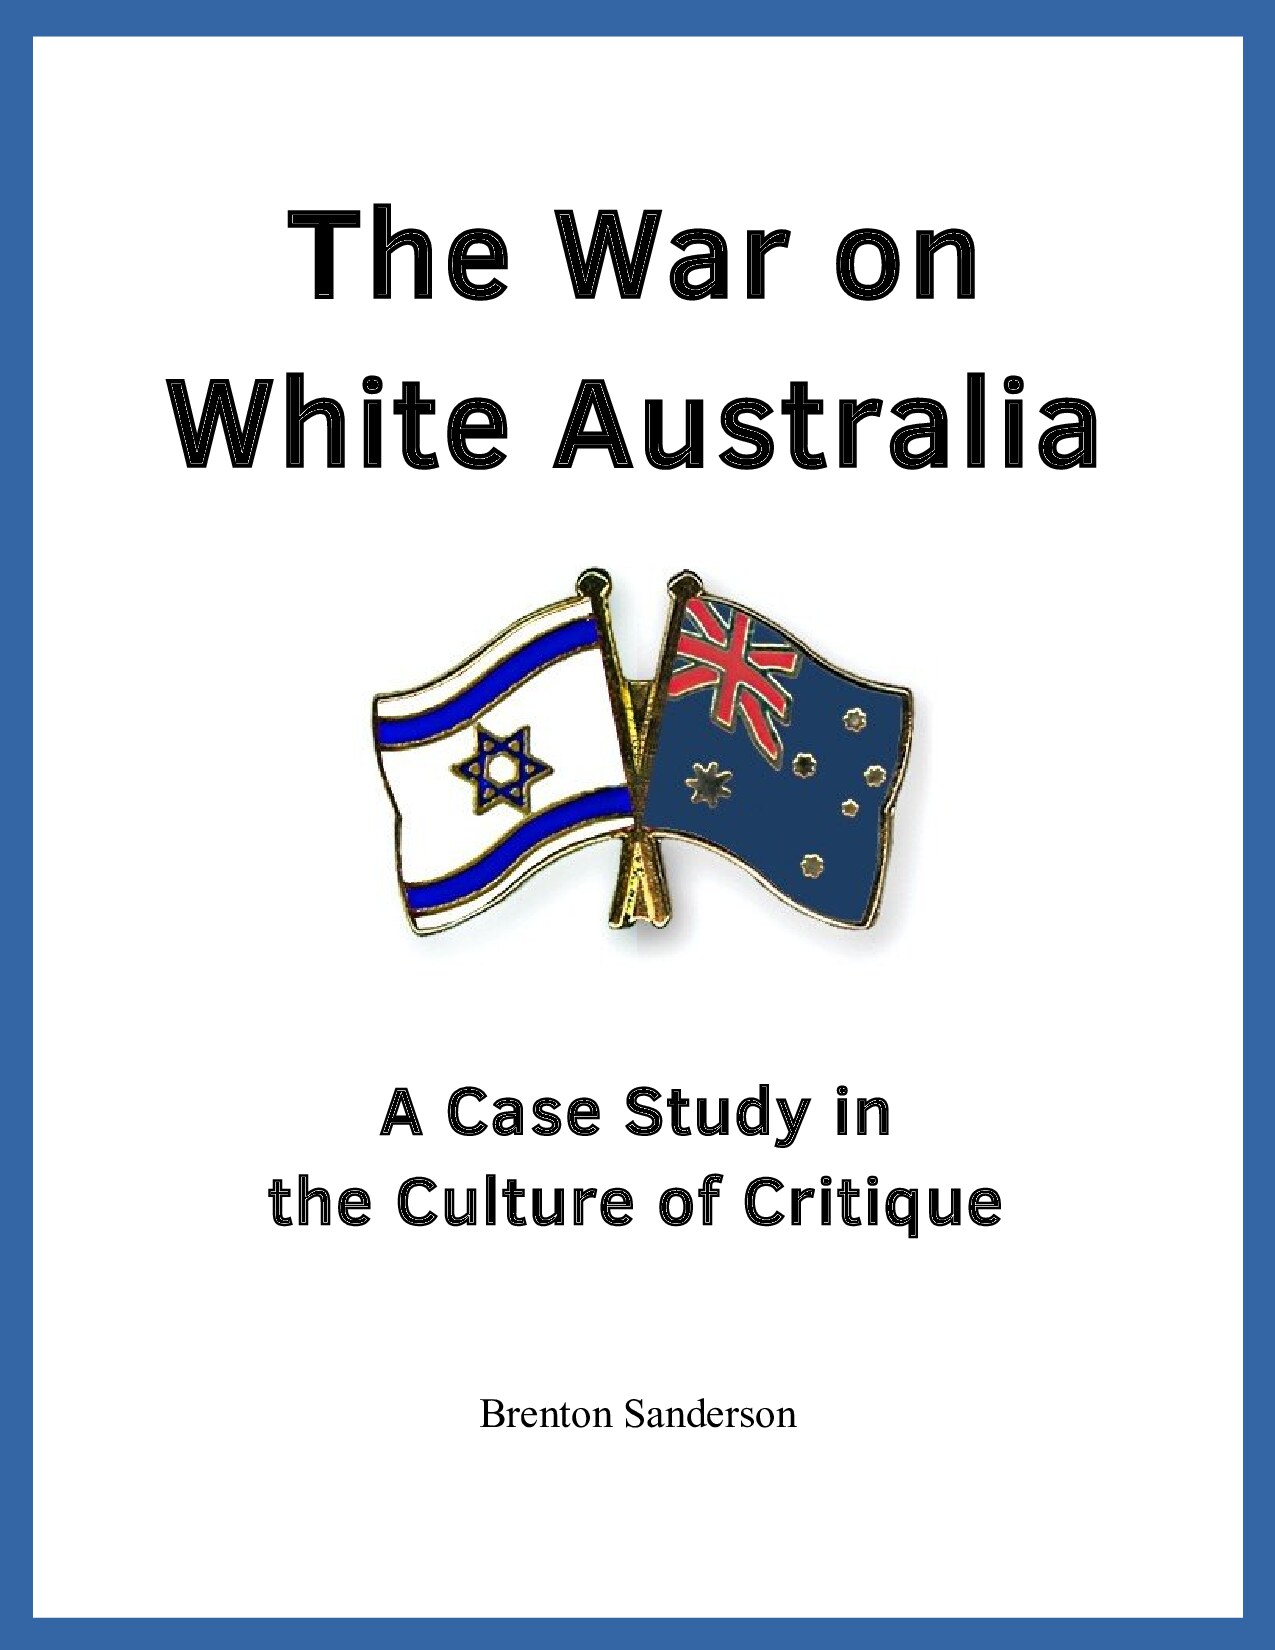 The War on White Australia: A Case Study in the Culture of Critique